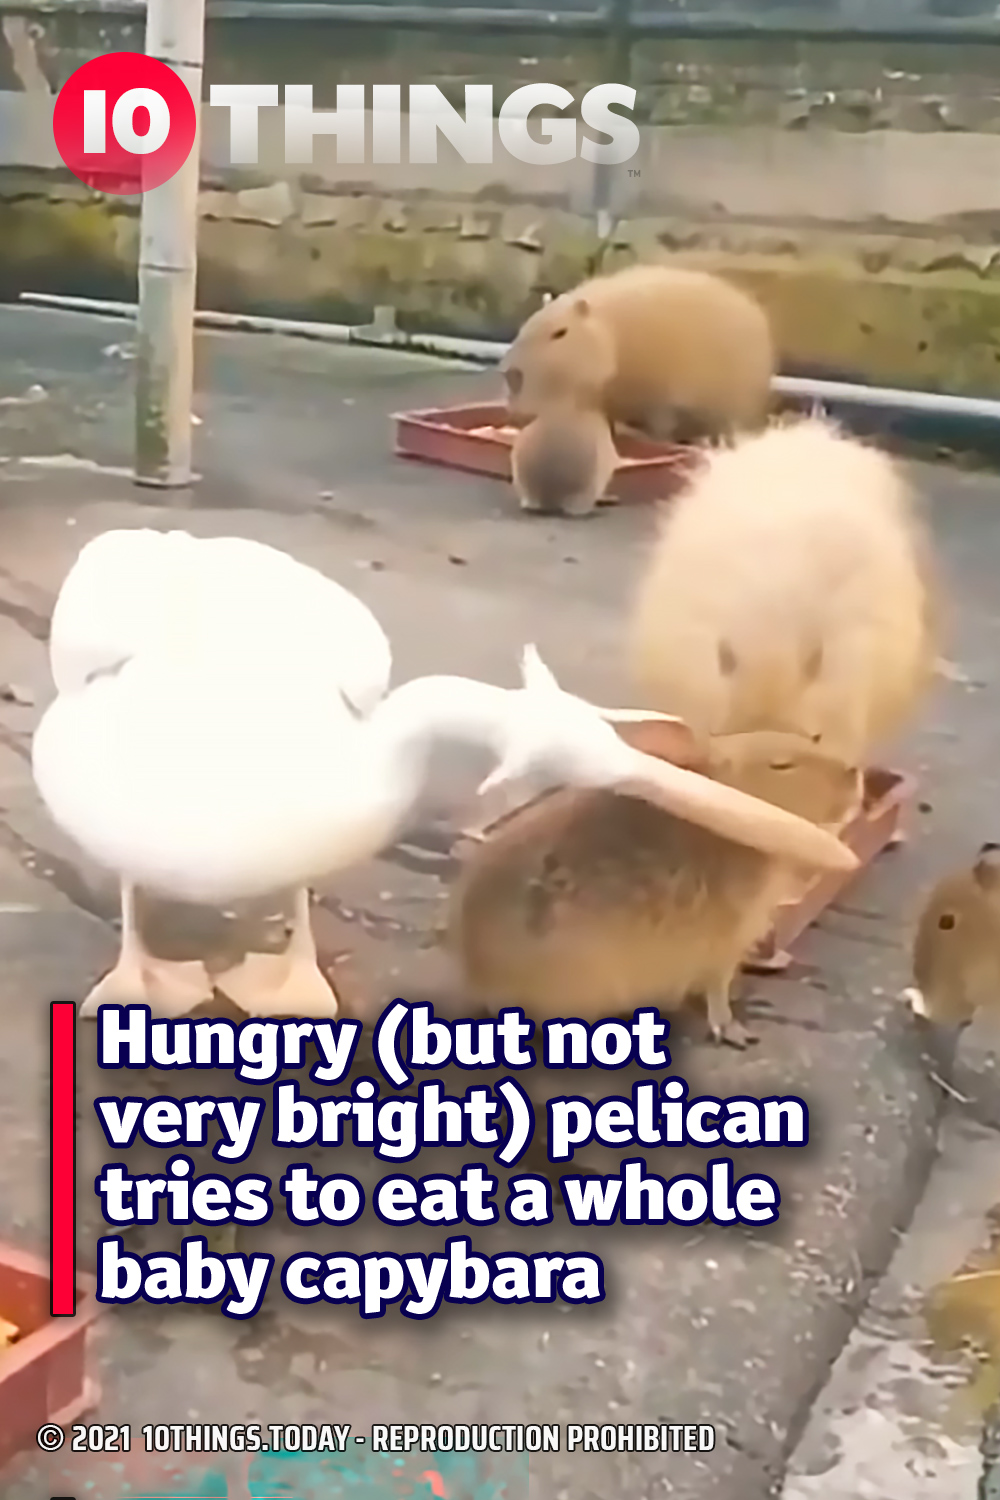 Hungry (but not very bright) pelican tries to eat a whole baby capybara